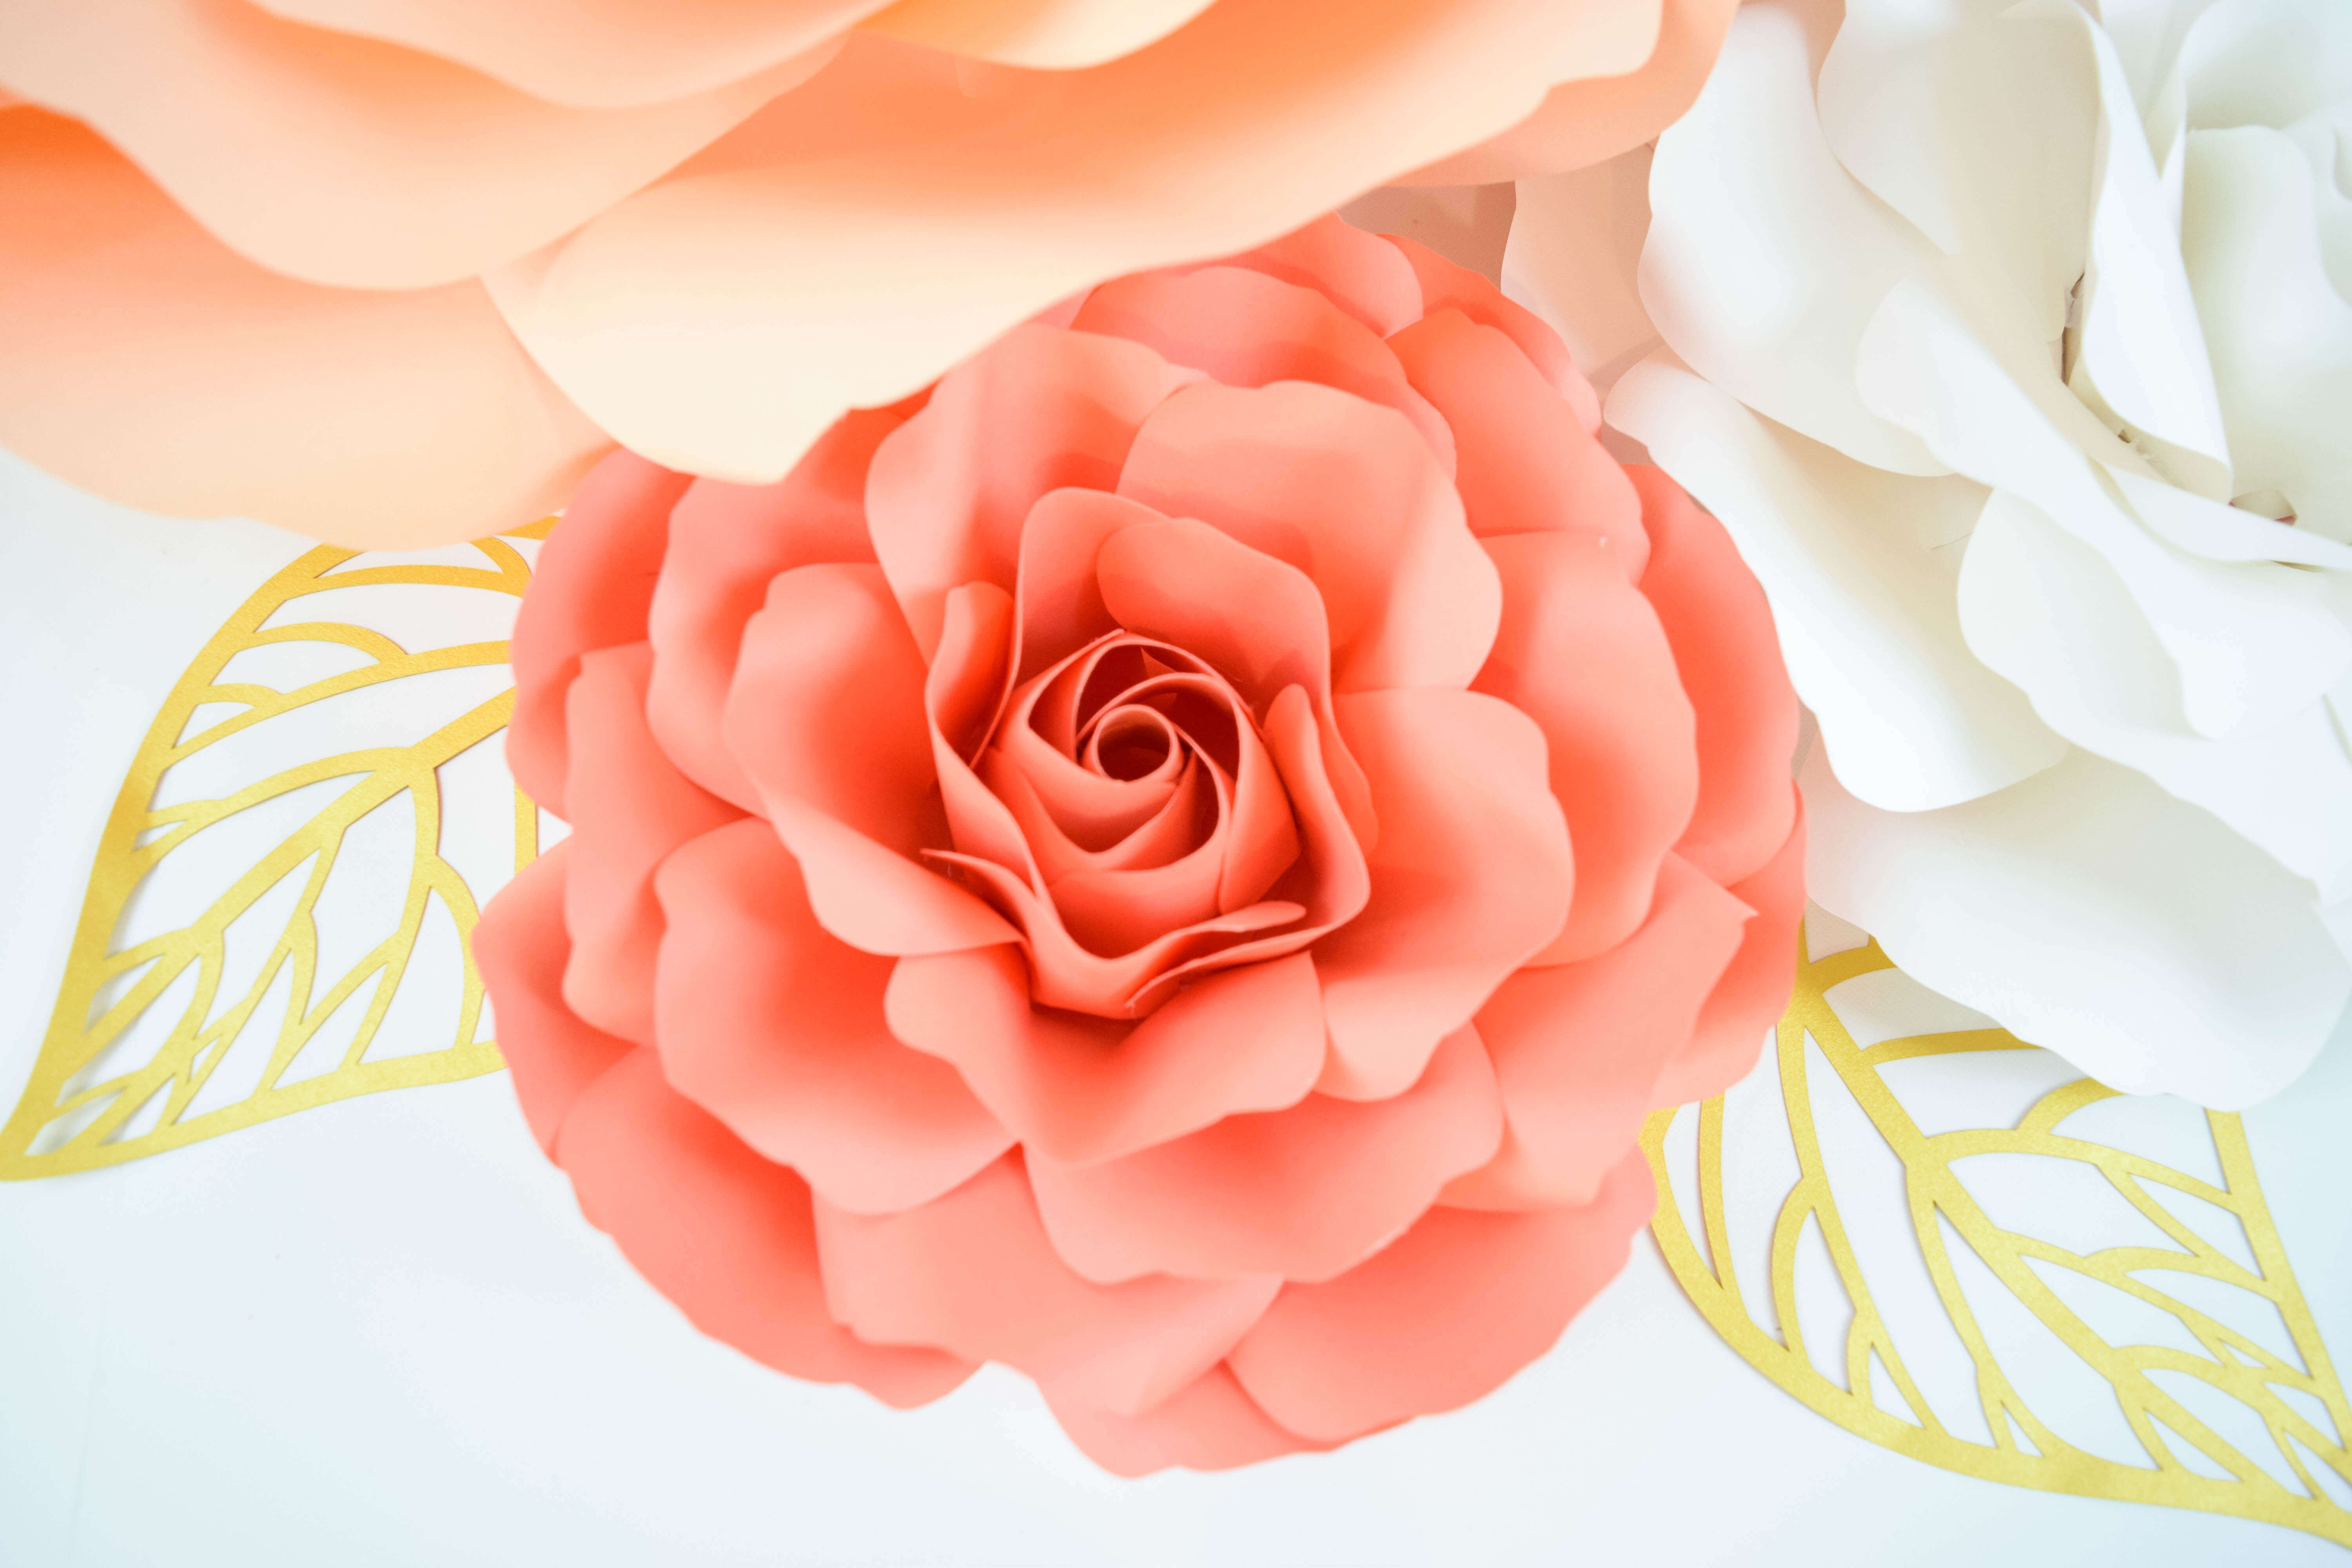 Giant Spiral Paper Rose Tutorial: Step by Step Instructions & Templates